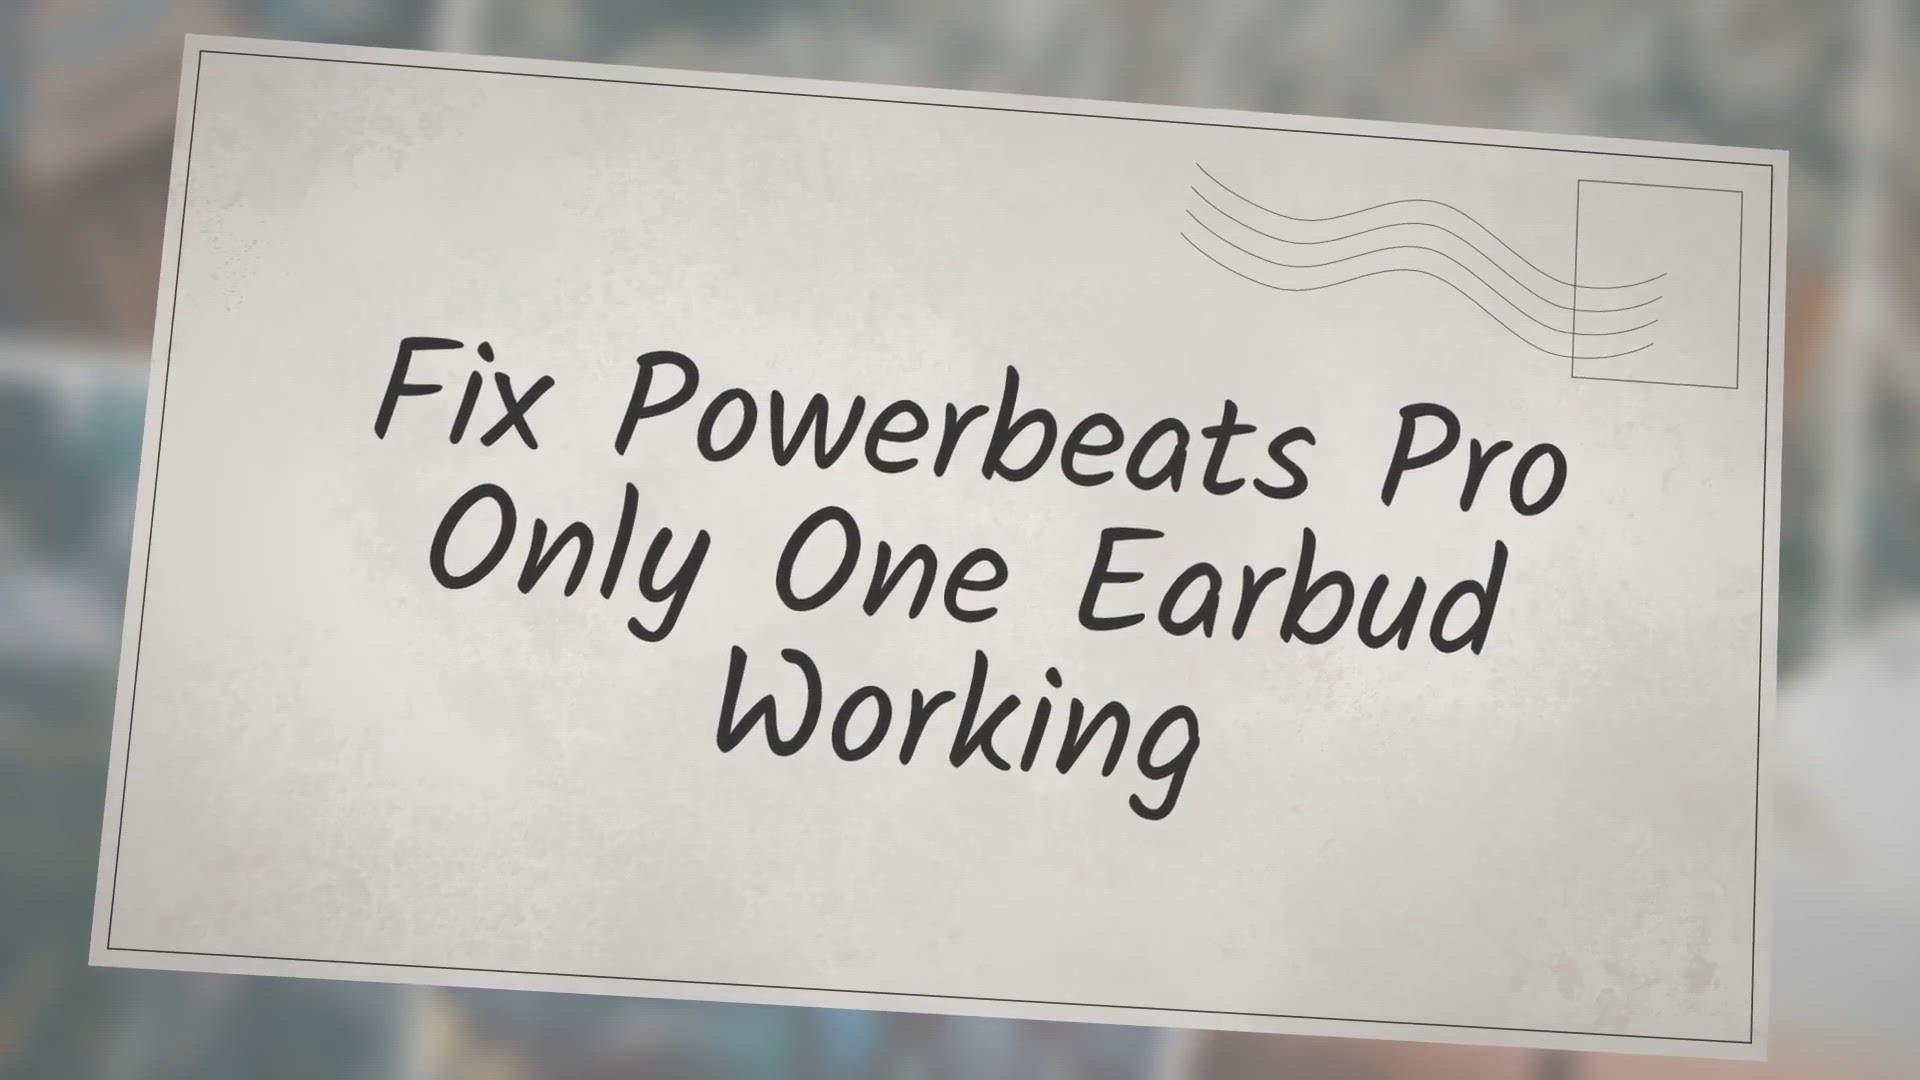 'Video thumbnail for Fix Powerbeats Pro Only One Earbud Working'